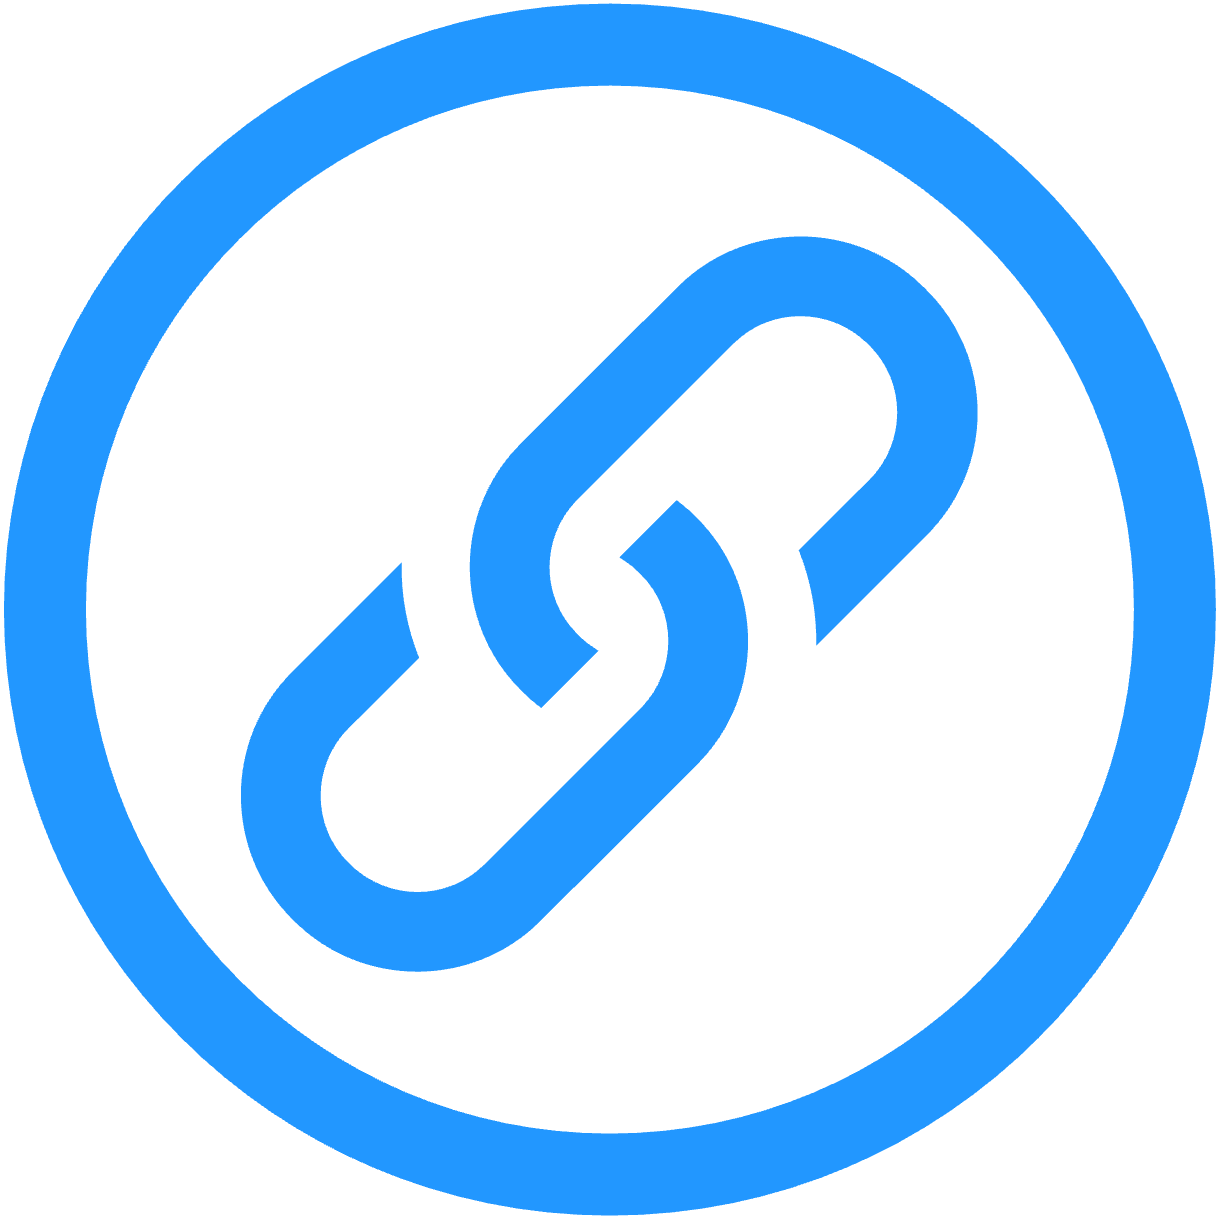 Circular icon of two linked chain links